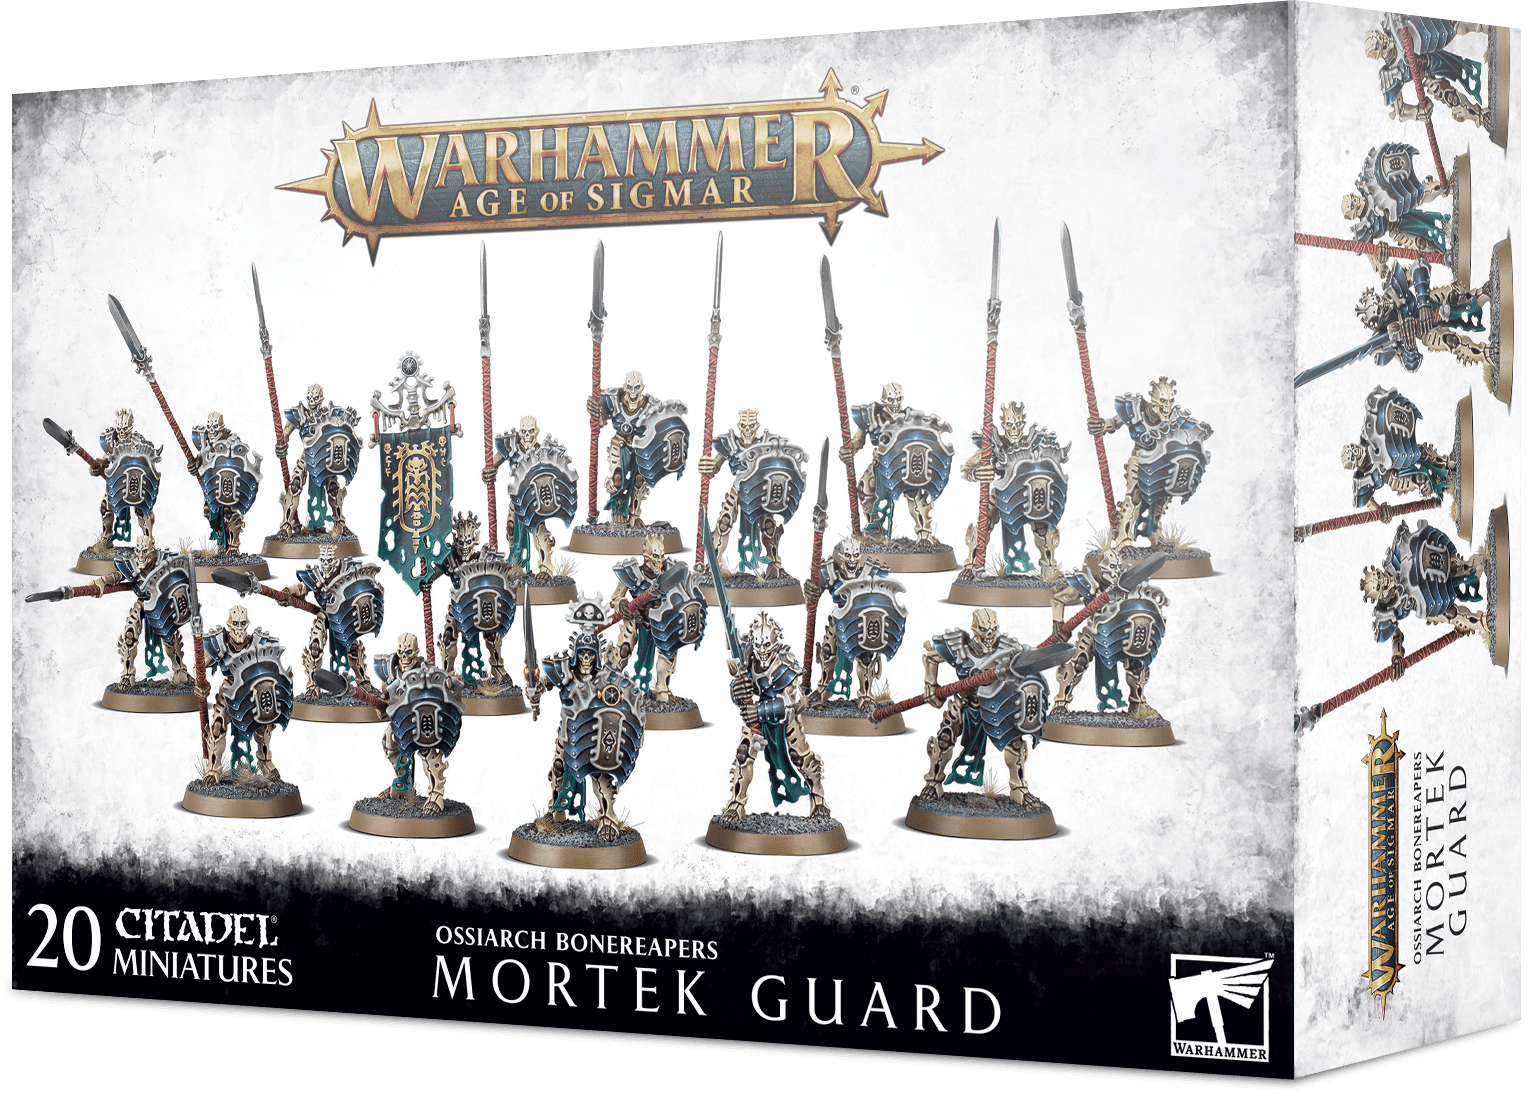 Ossiarch Bonereapers - Mortek Guard | All About Games